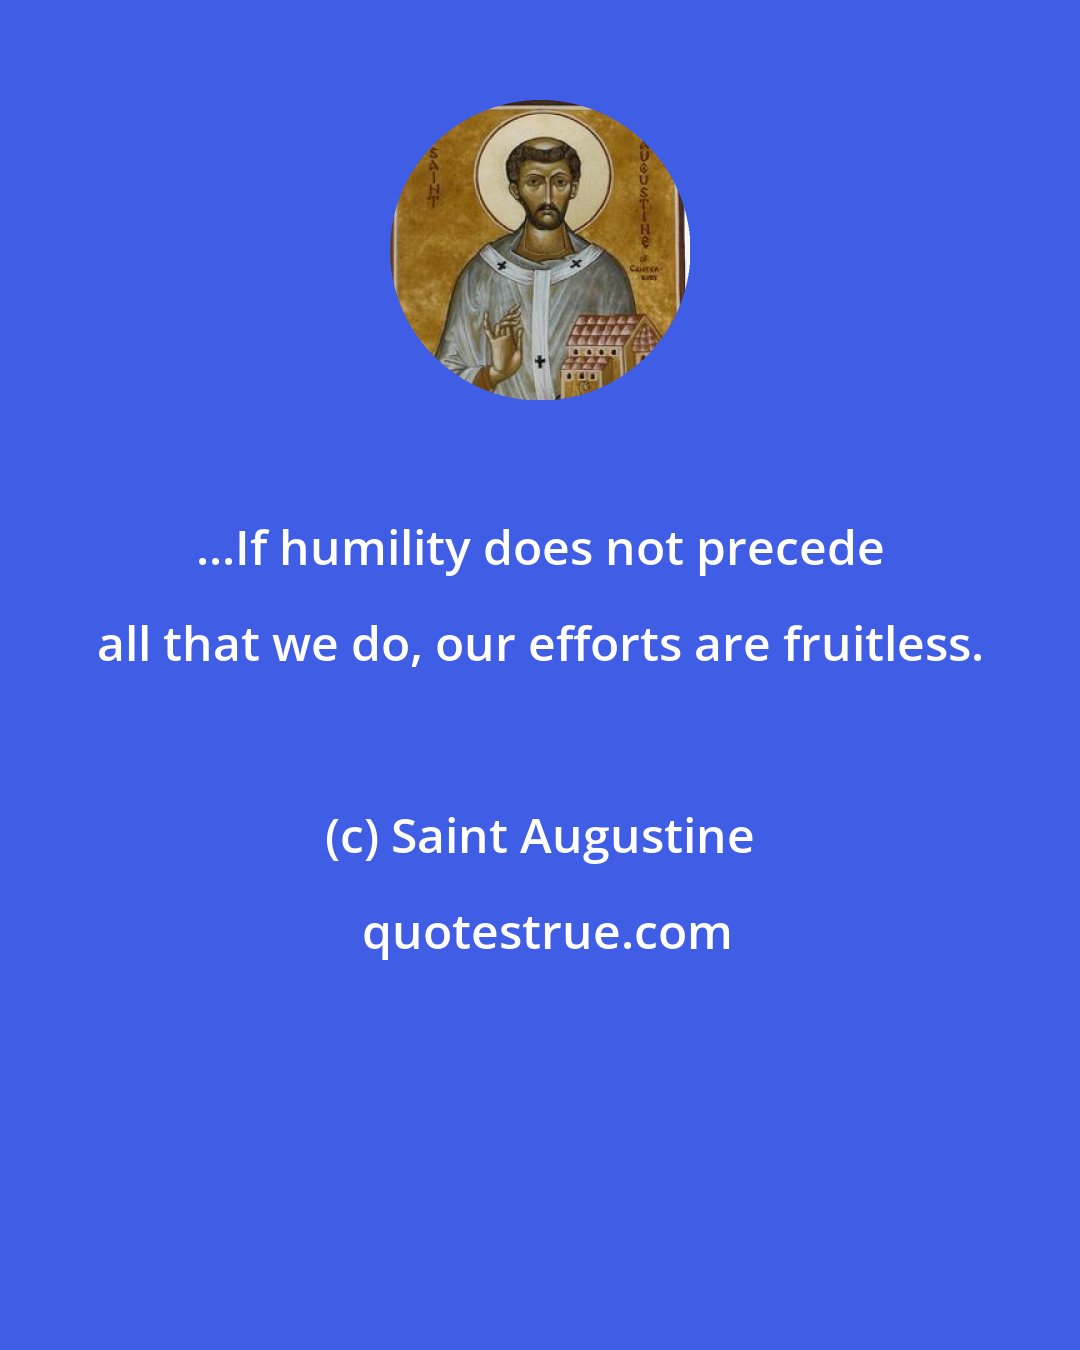 Saint Augustine: ...If humility does not precede all that we do, our efforts are fruitless.